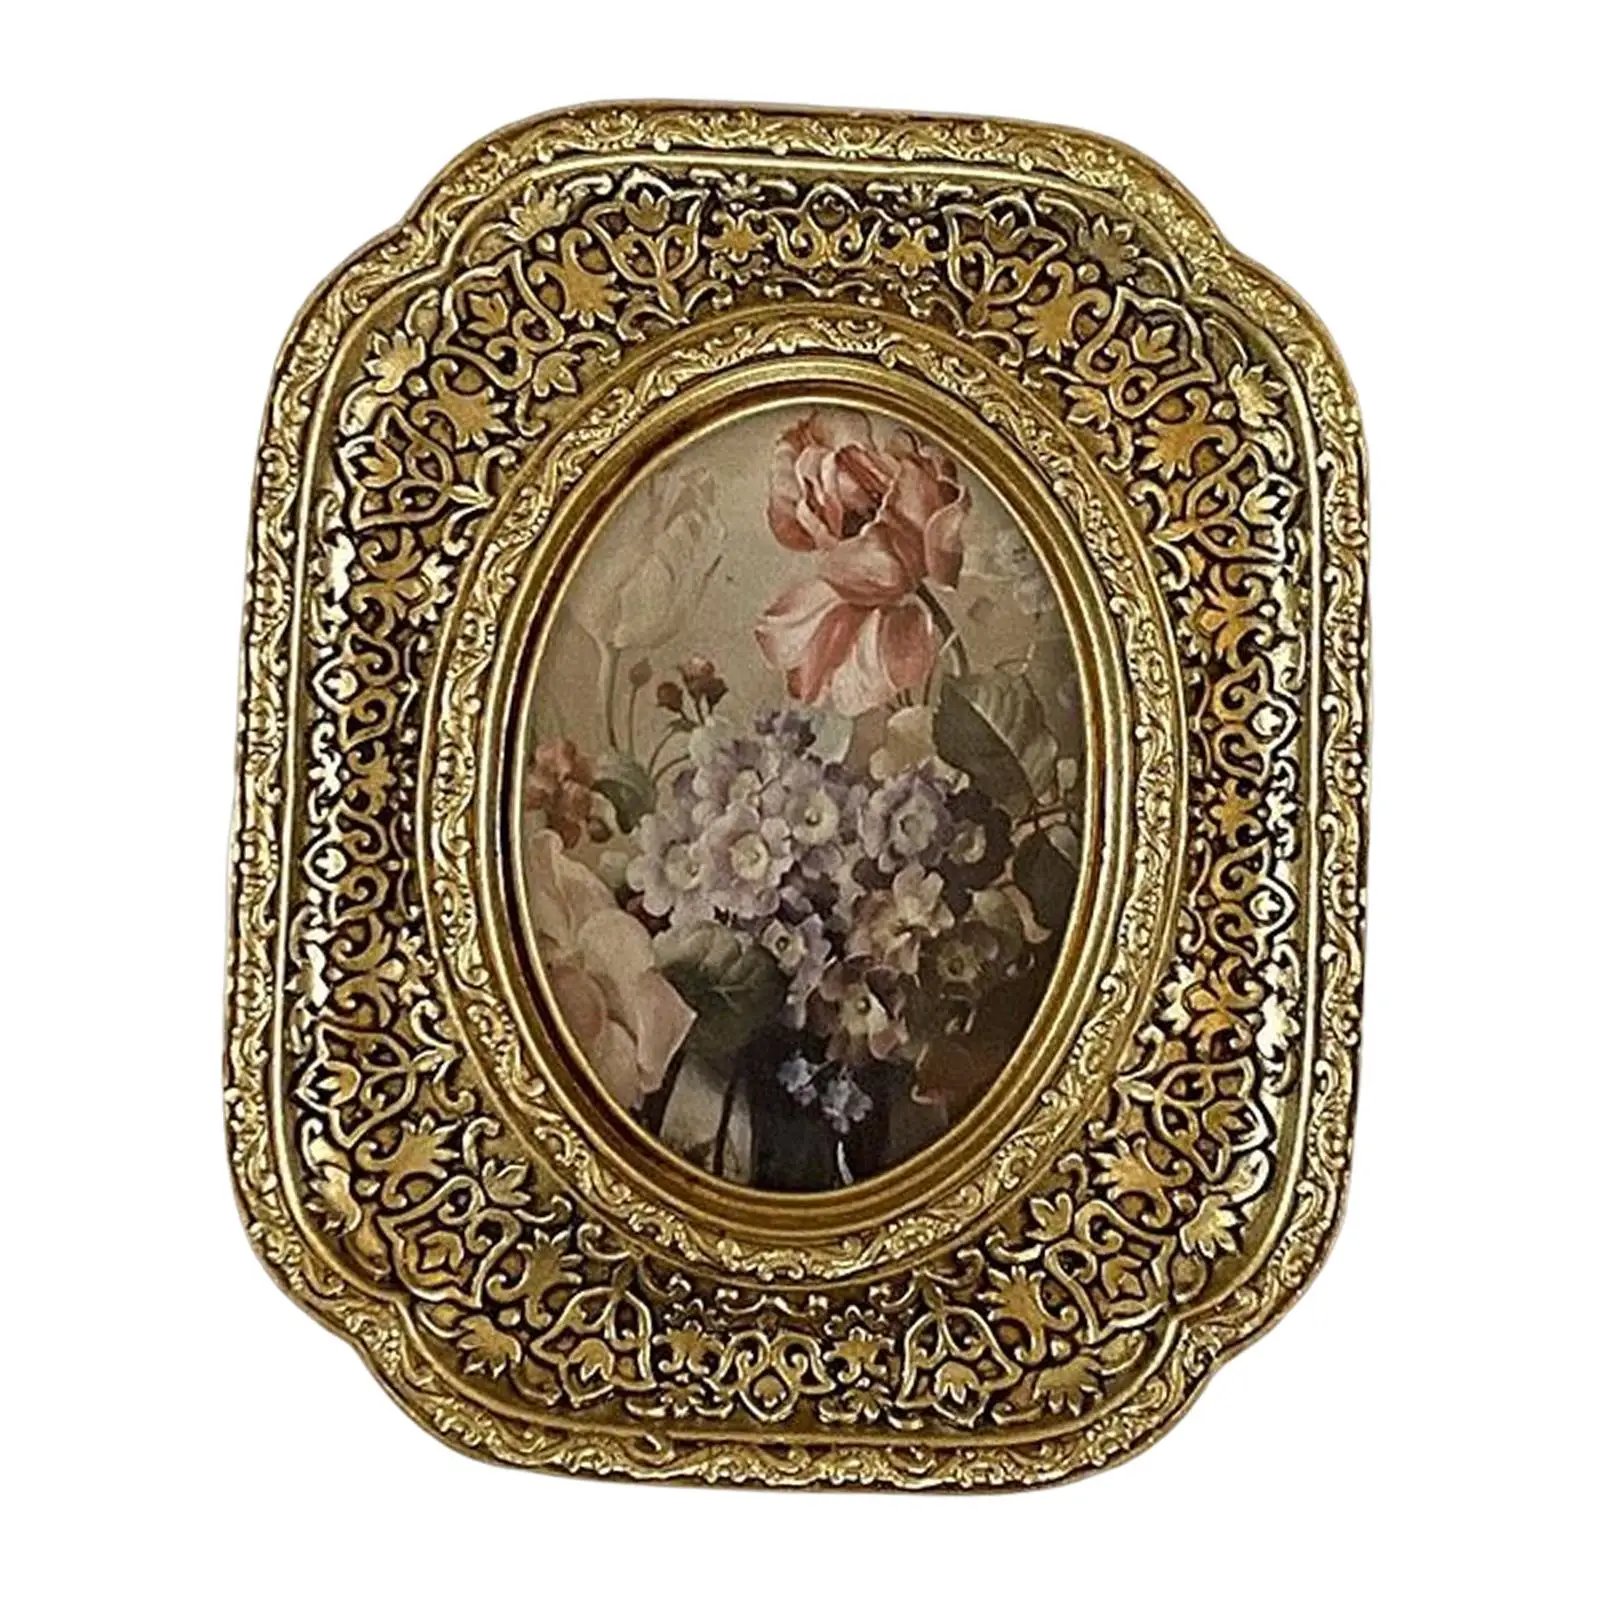 Antique Style Ornate Picture Frame, Tabletop Wall Hanging Embossed Photo Gallery Photo Frame for New Year Holiday Home Decor